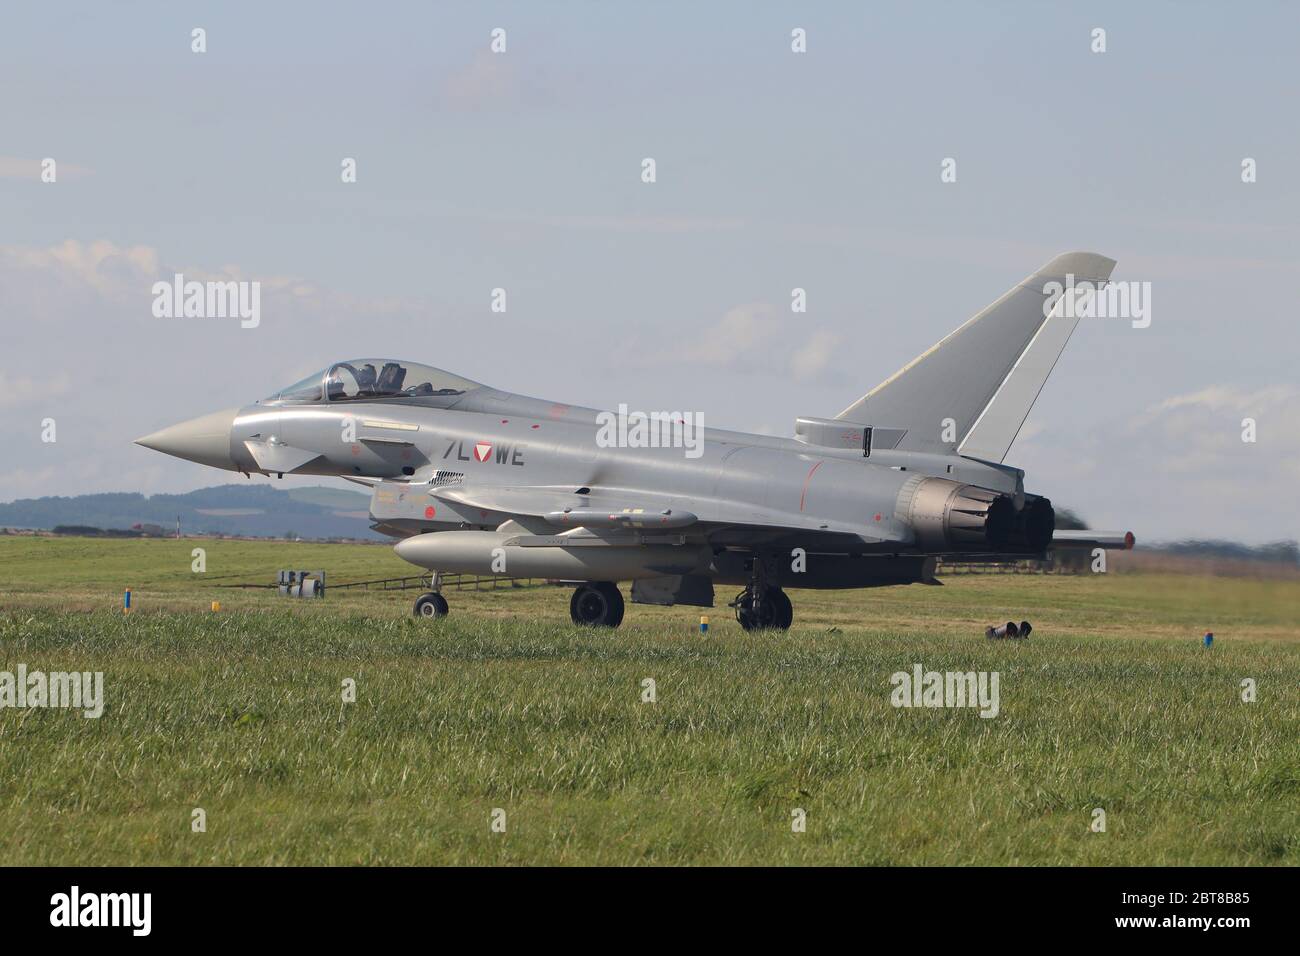 7L-WE, a Eurofighter EF-2000 Typhoon operated by the Austrian Air Force, at RAF Leuchars in Fife, Scotland. Stock Photo